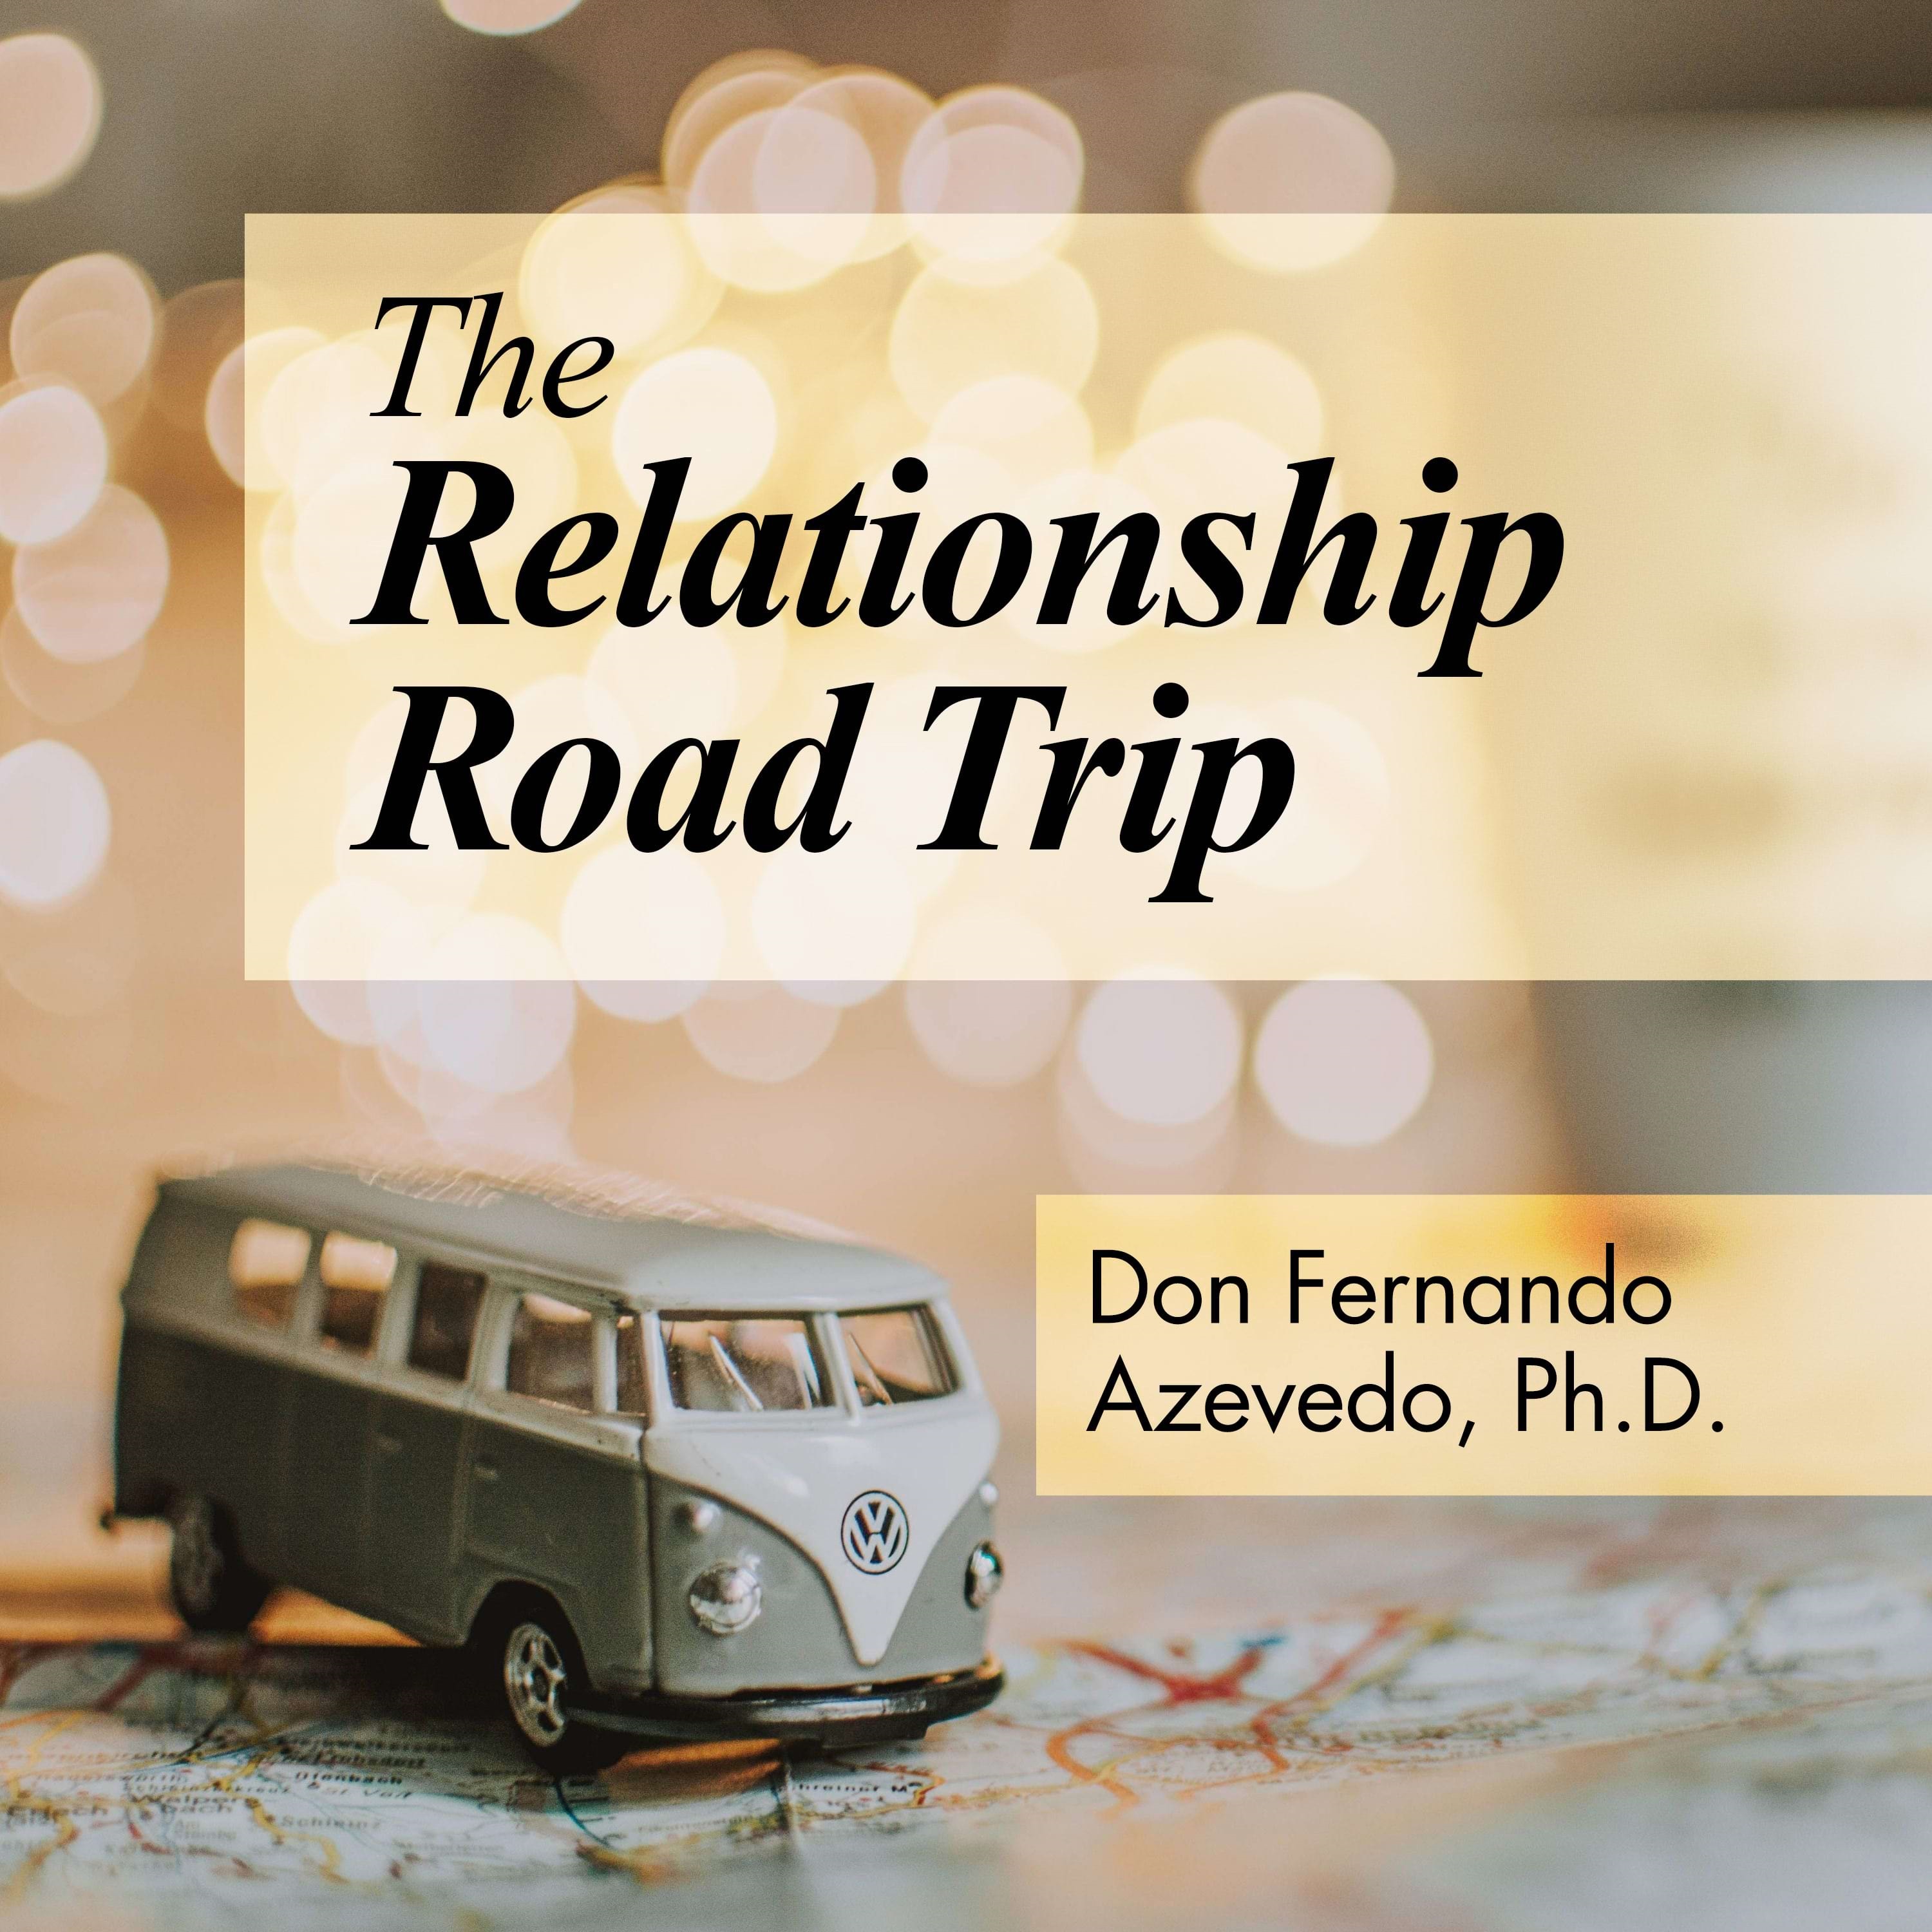 The Relationship Road trip